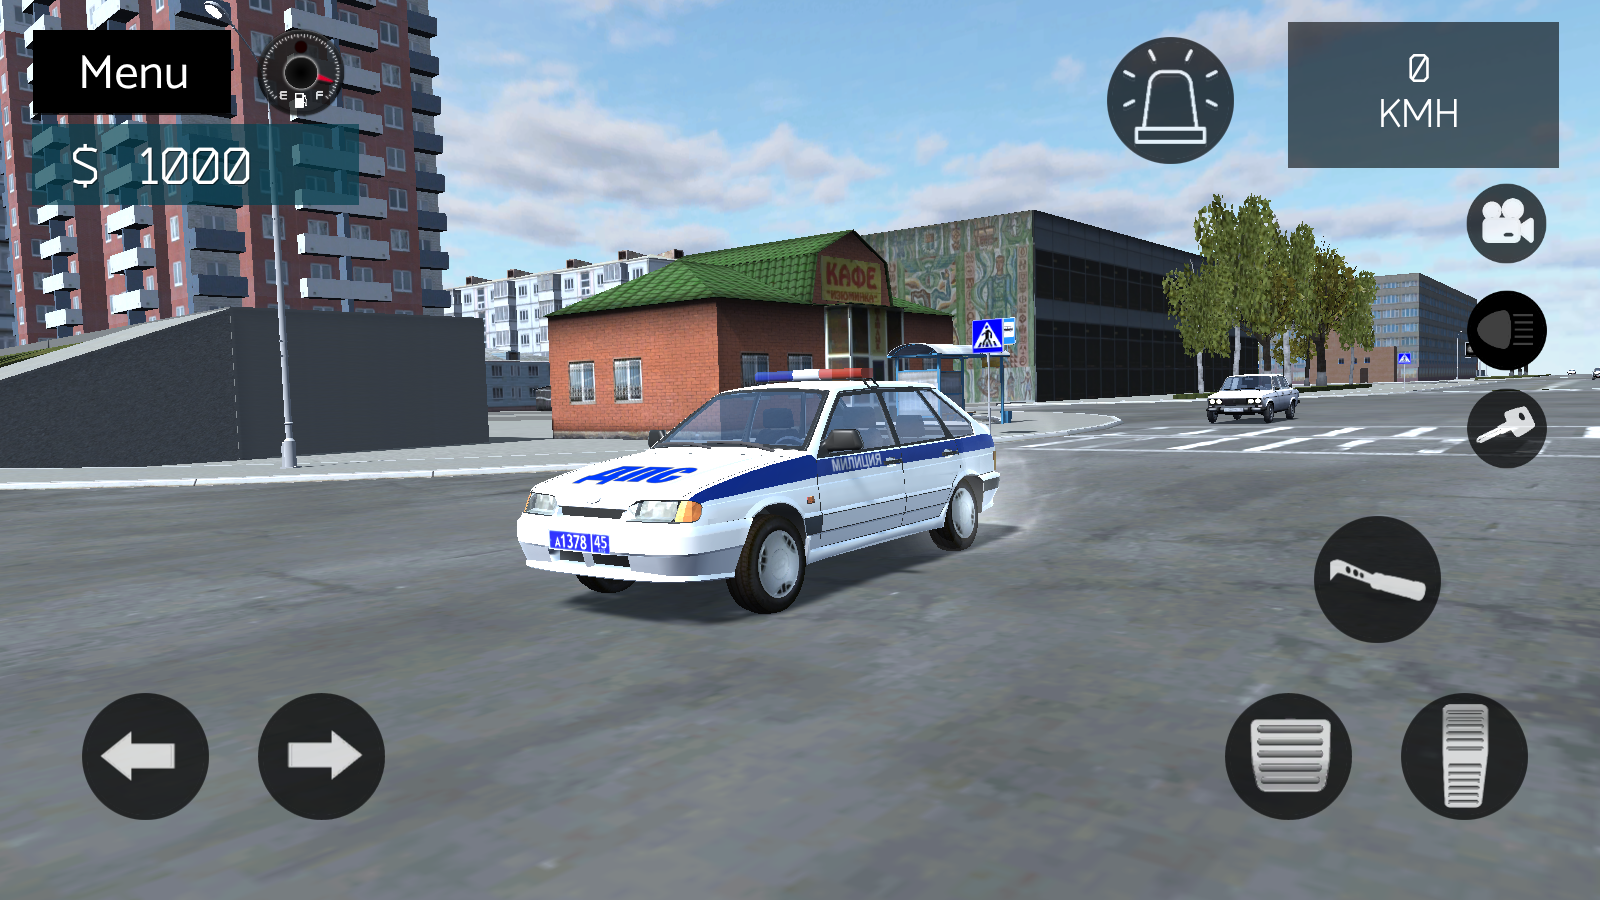 Oppana Games on X: Russian cars in mobile simulator! Try it now for free!  Download link:  #Oppana #Games #OG #Car #Simulator  #Mobile #Russian #cars #game #free #play #Android #Tuning #download   /